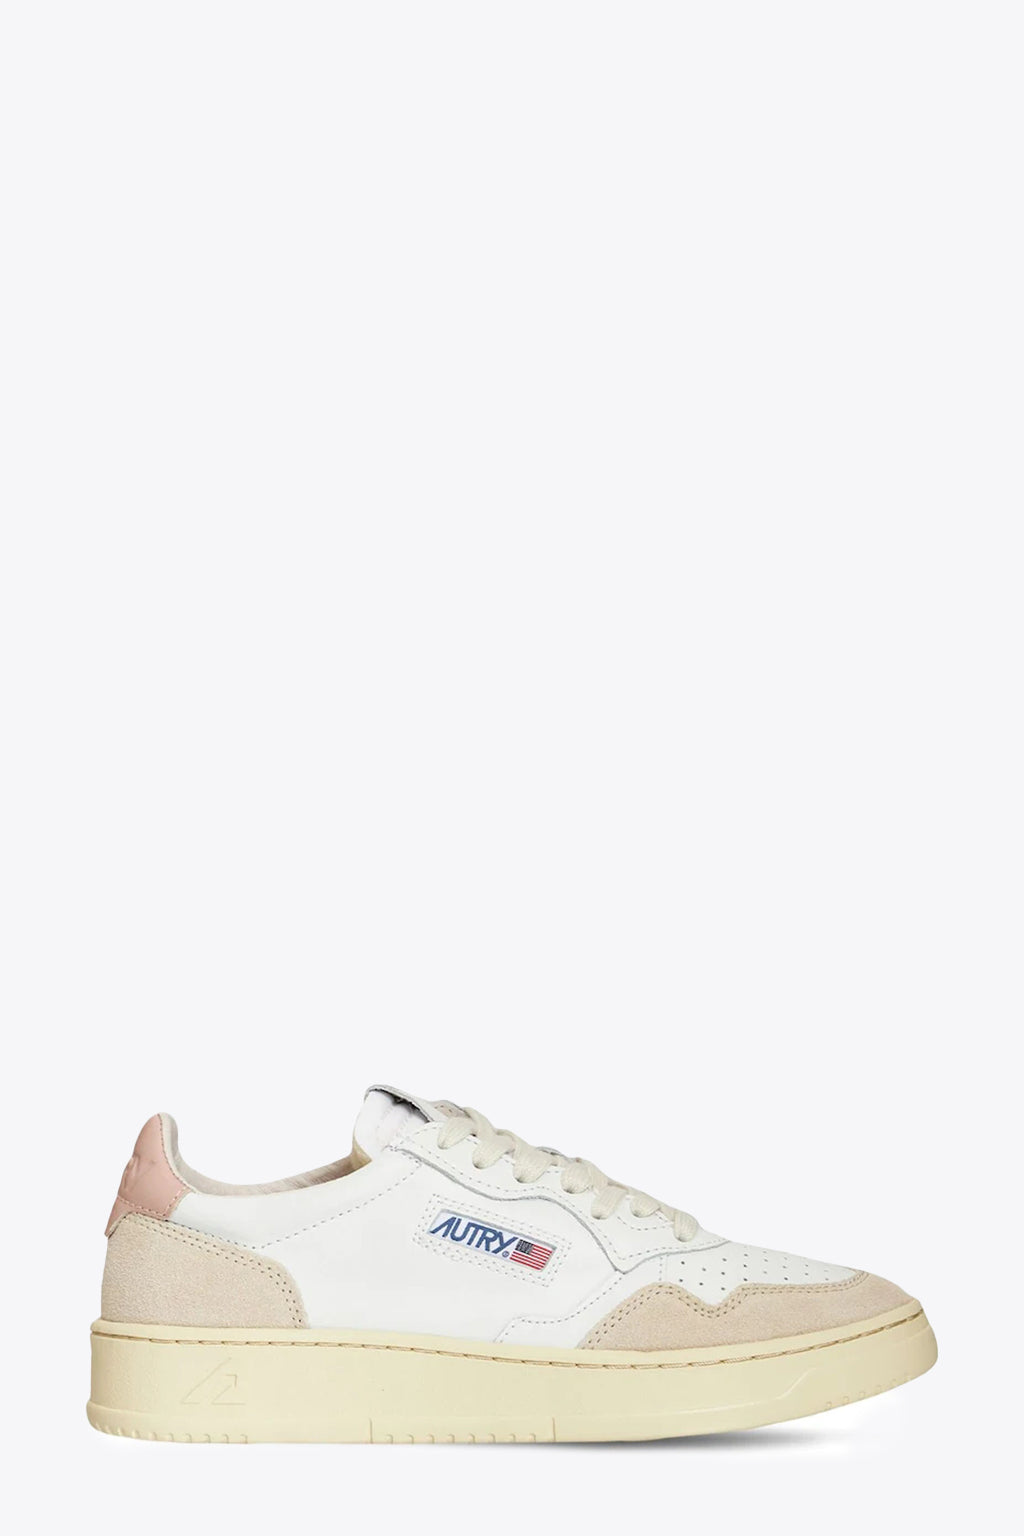 alt-image__White-leather-low-sneaker-with-pale-pink-back-tab---Medalist